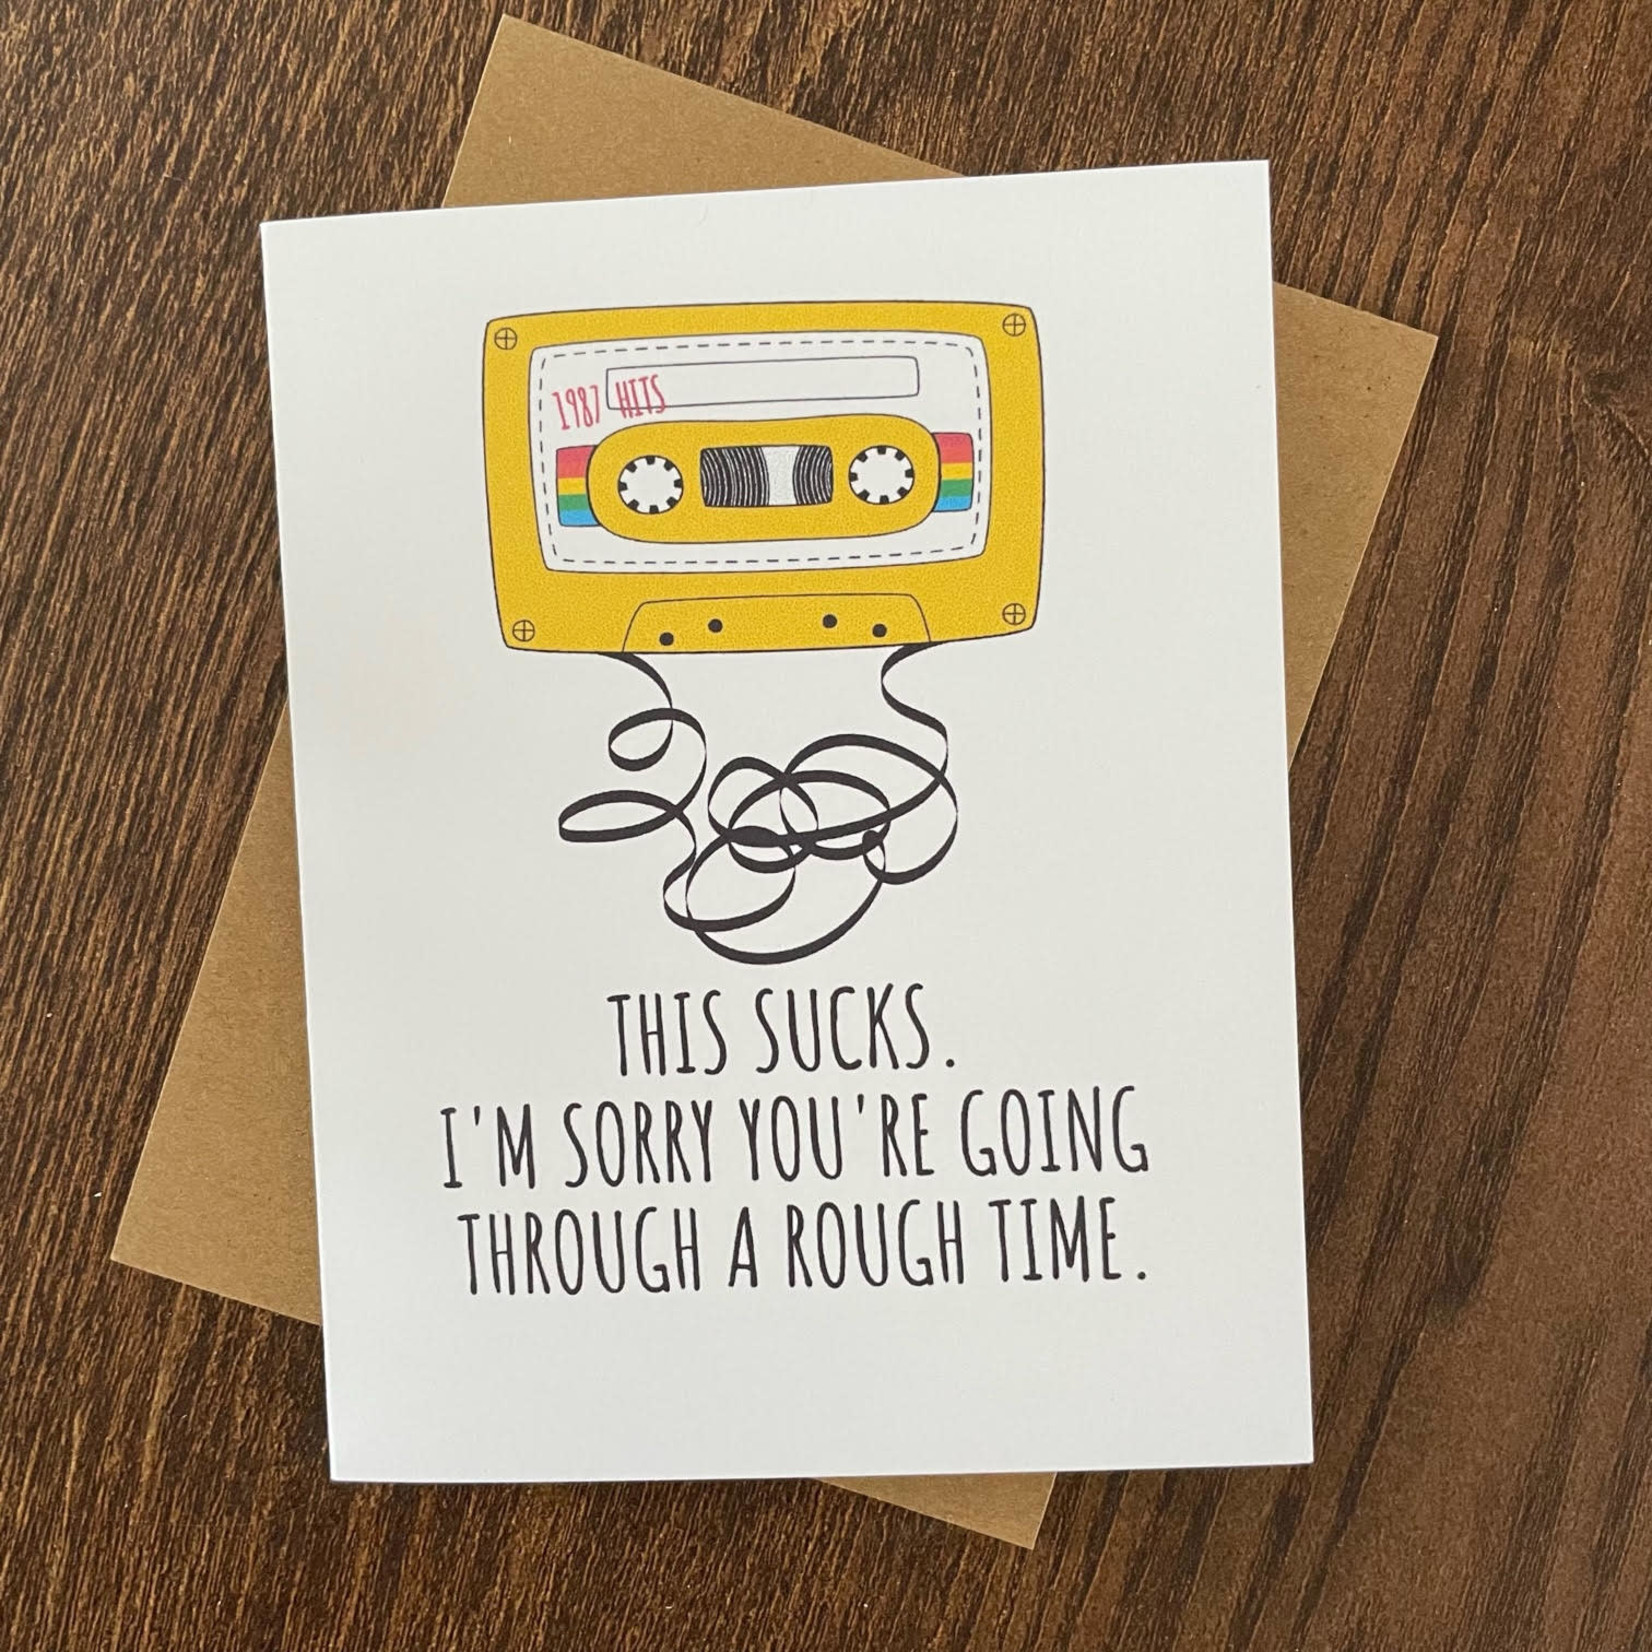 Greeting Card - This Sucks. I'm Sorry You're Going Through A Rough Time.